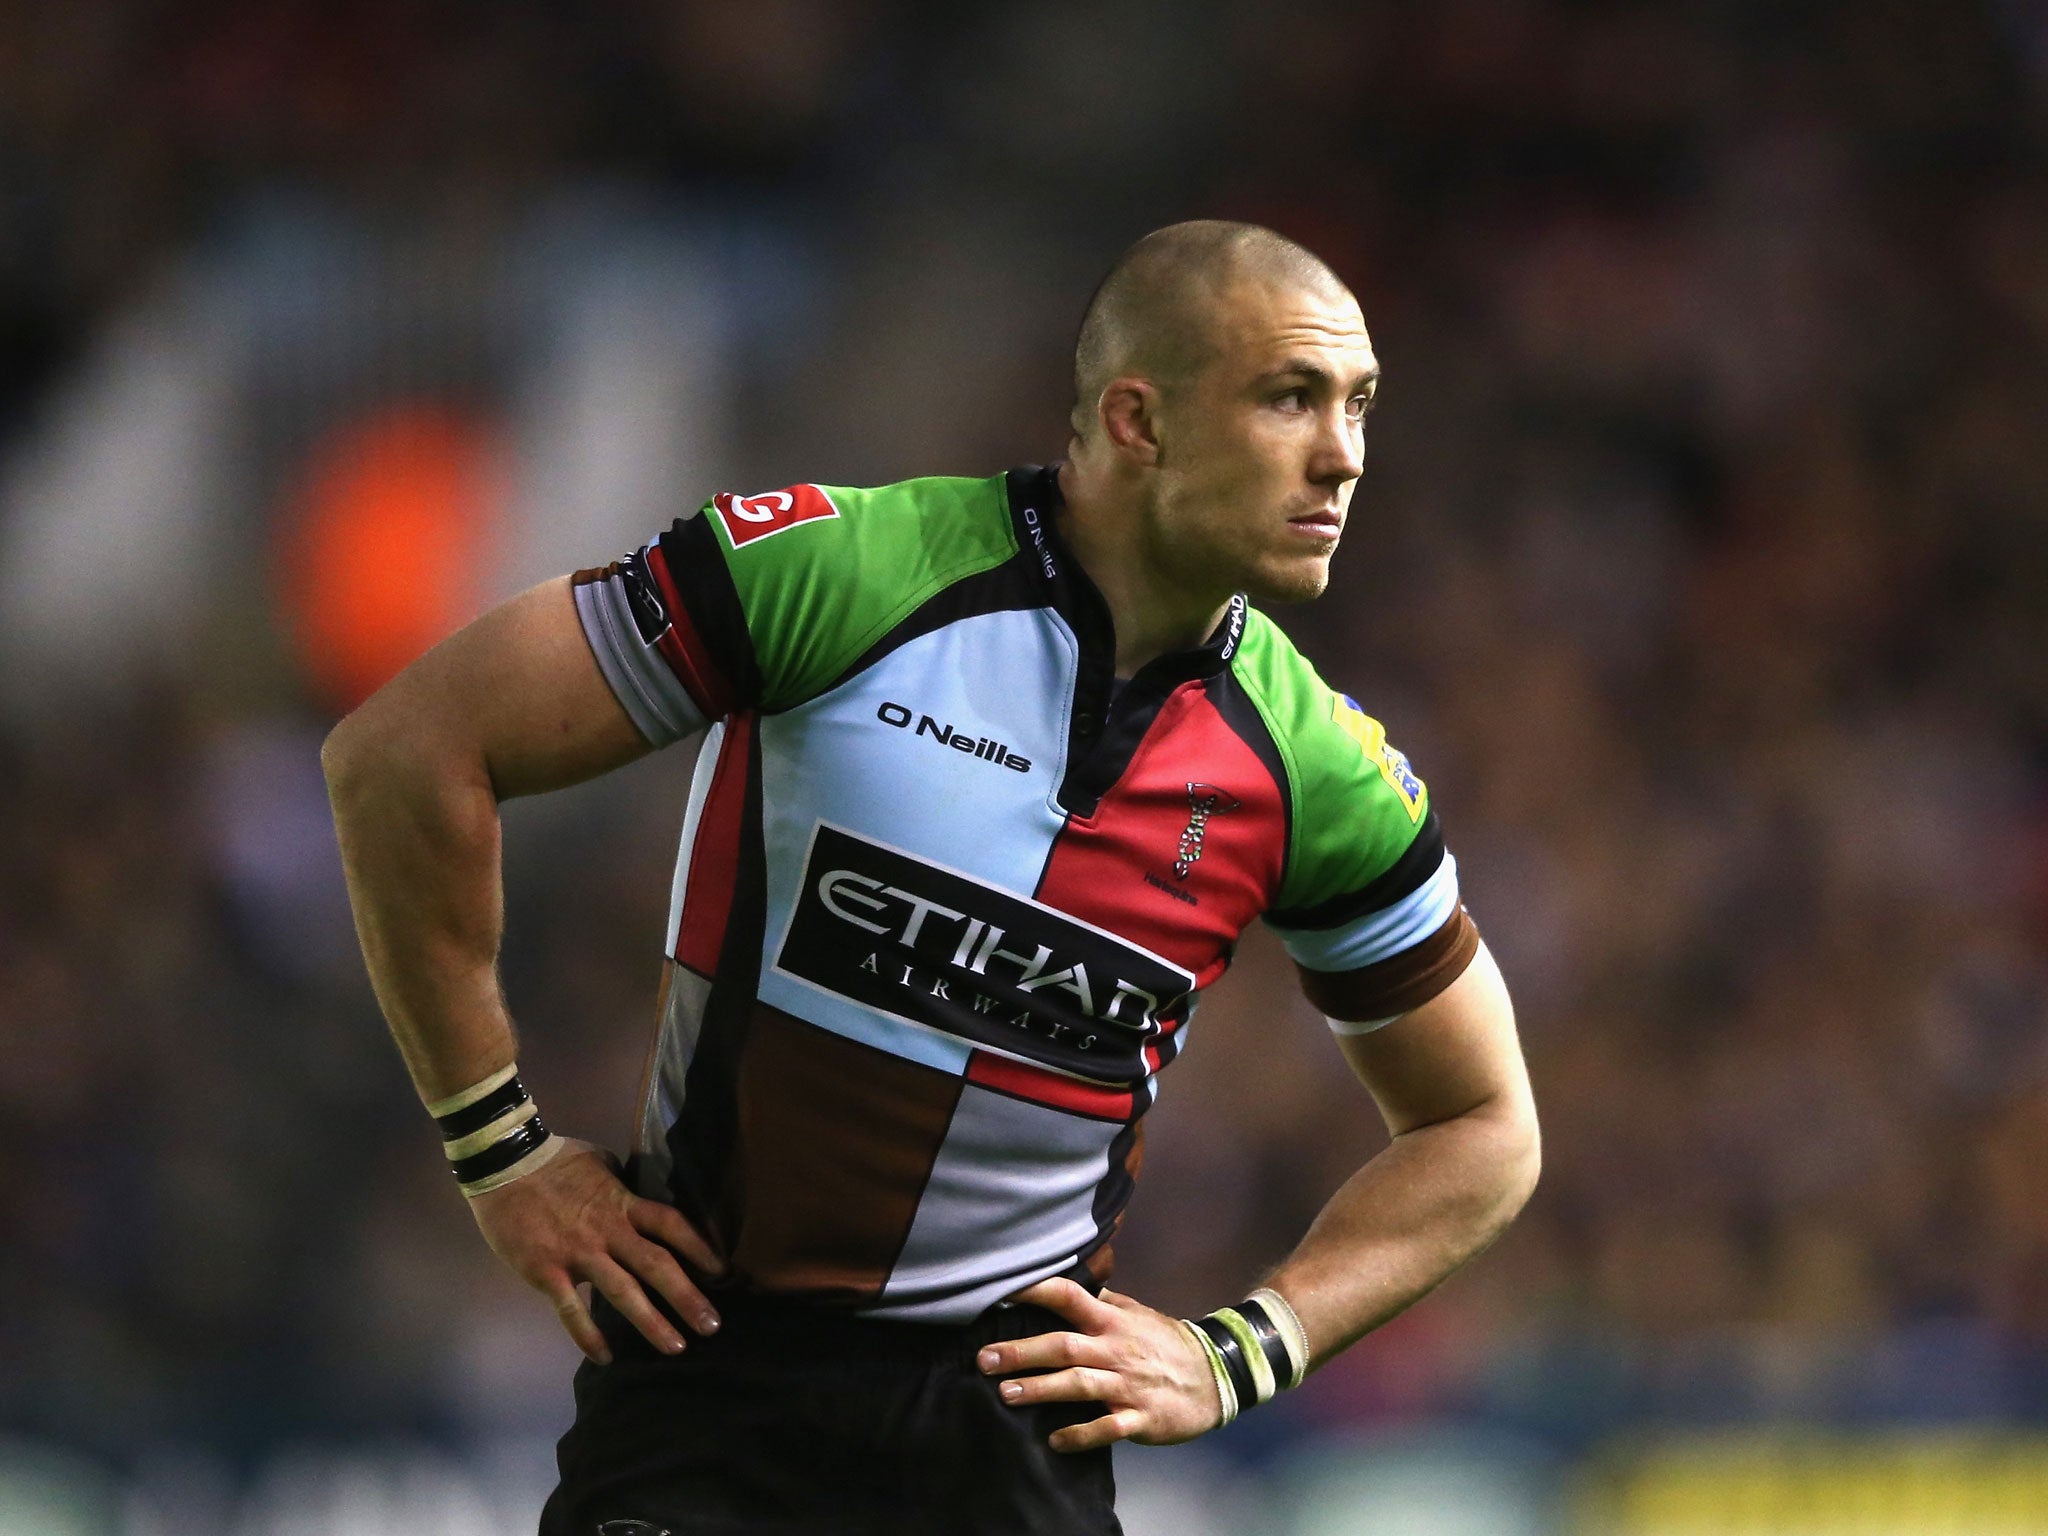 Full-back Mike Brown is back in the Harlequins side after injury